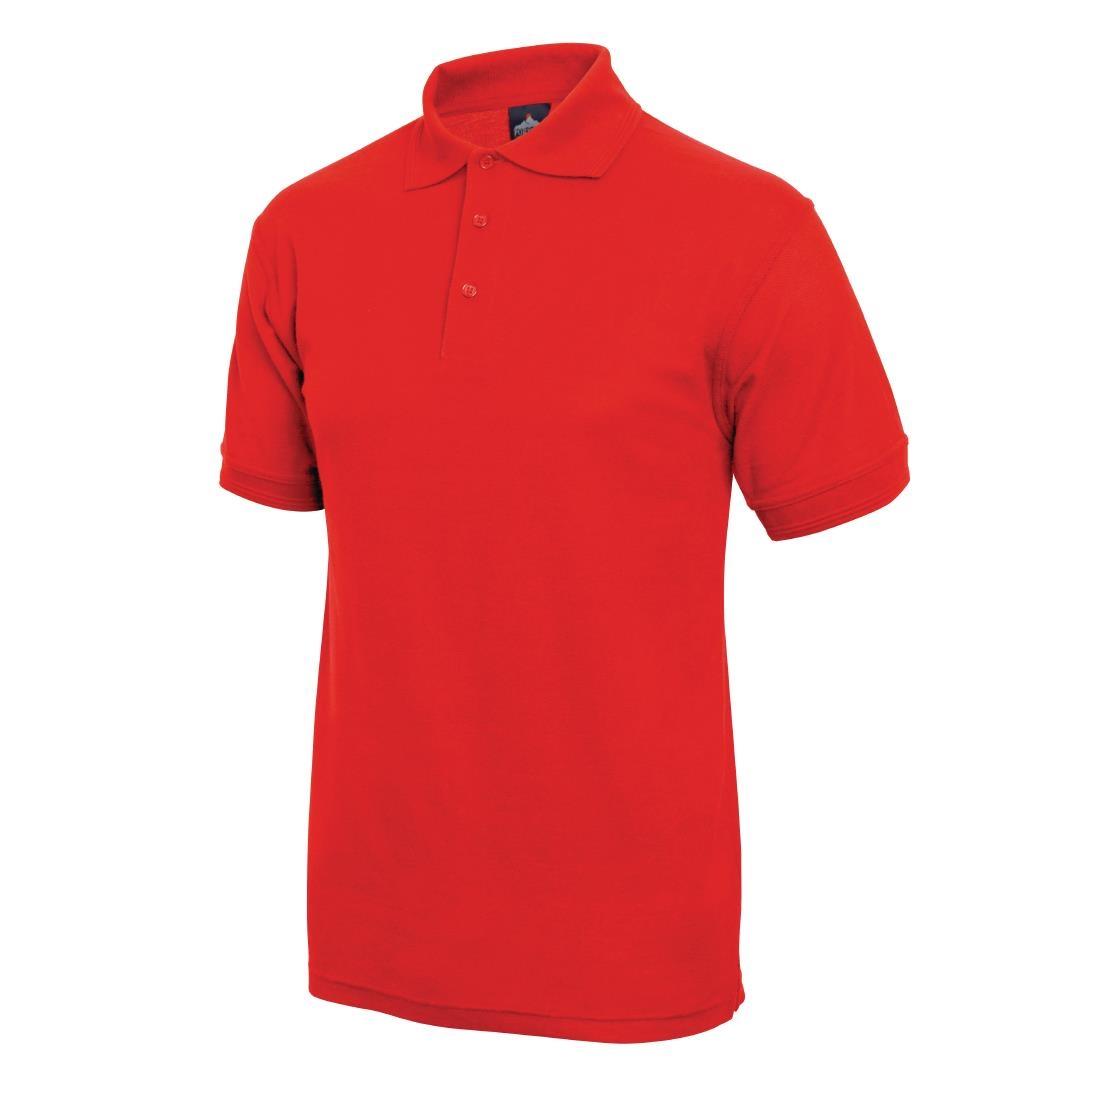 Unisex Polo Shirt Red L - A762-L  - 2